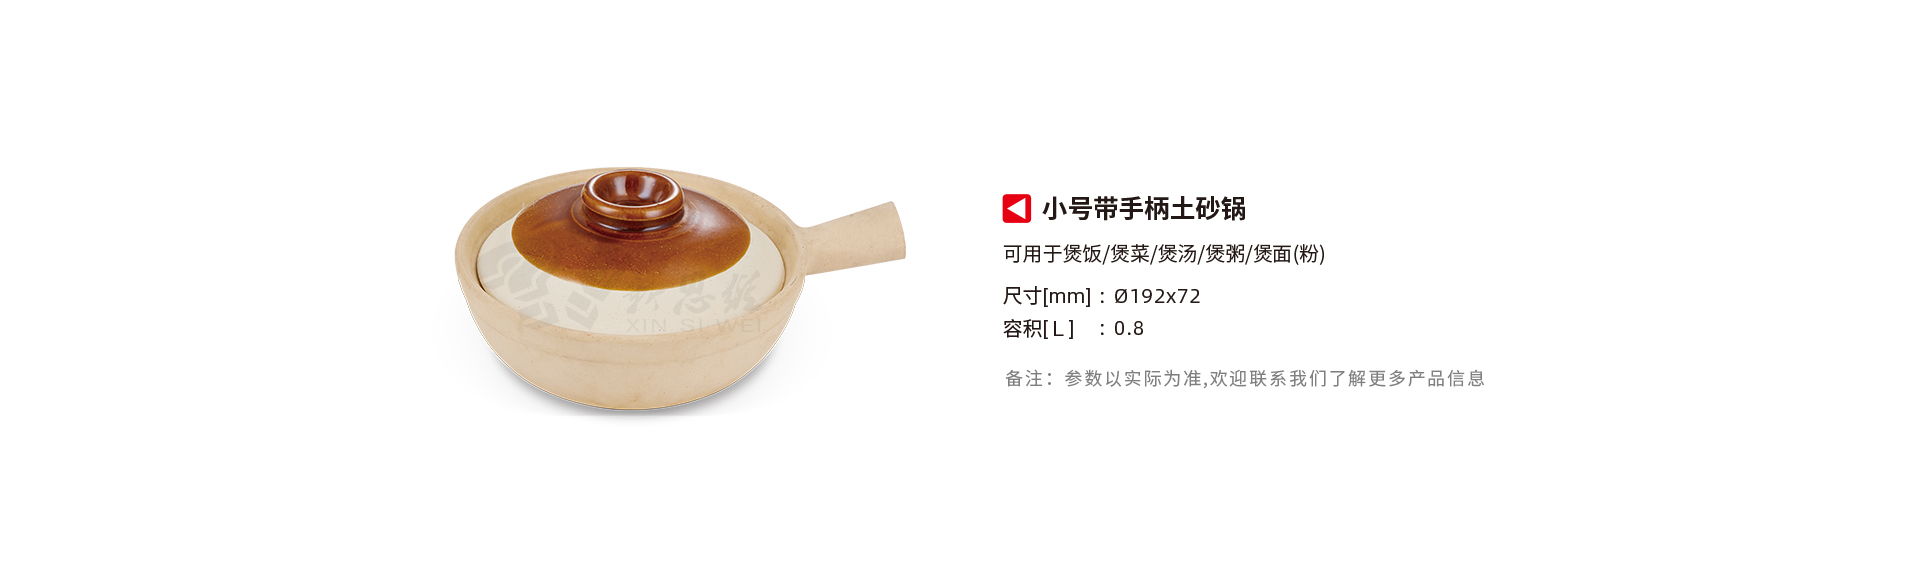 xinsiwei_supporing_materials_small_clay_pot_with_handle_product_parameters.jpg